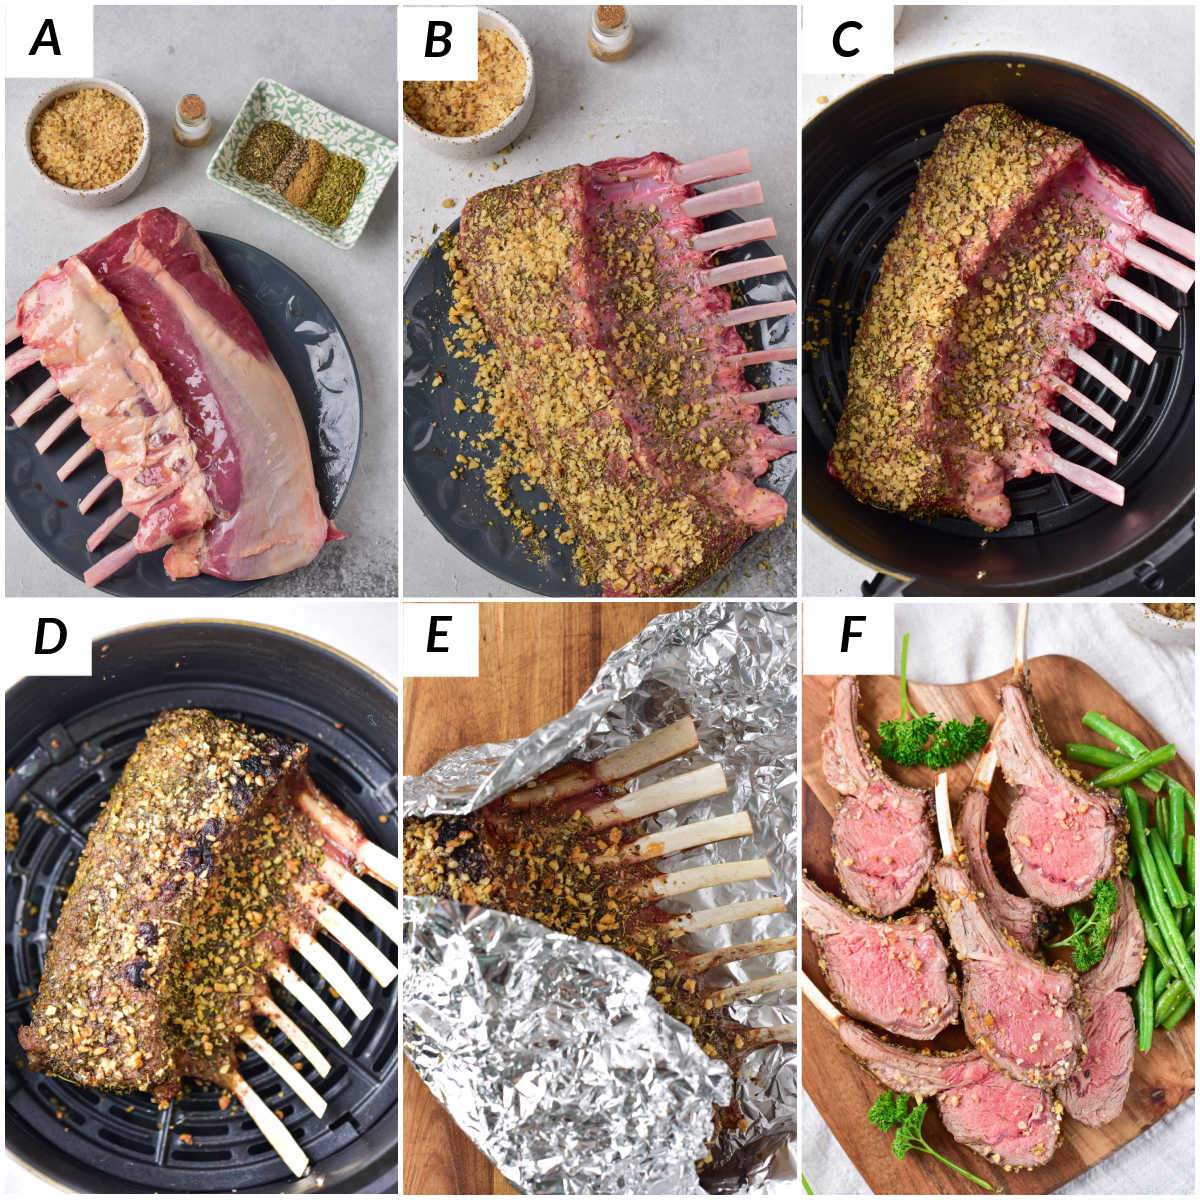 image collage showing the steps for making air fryer rack of lamb